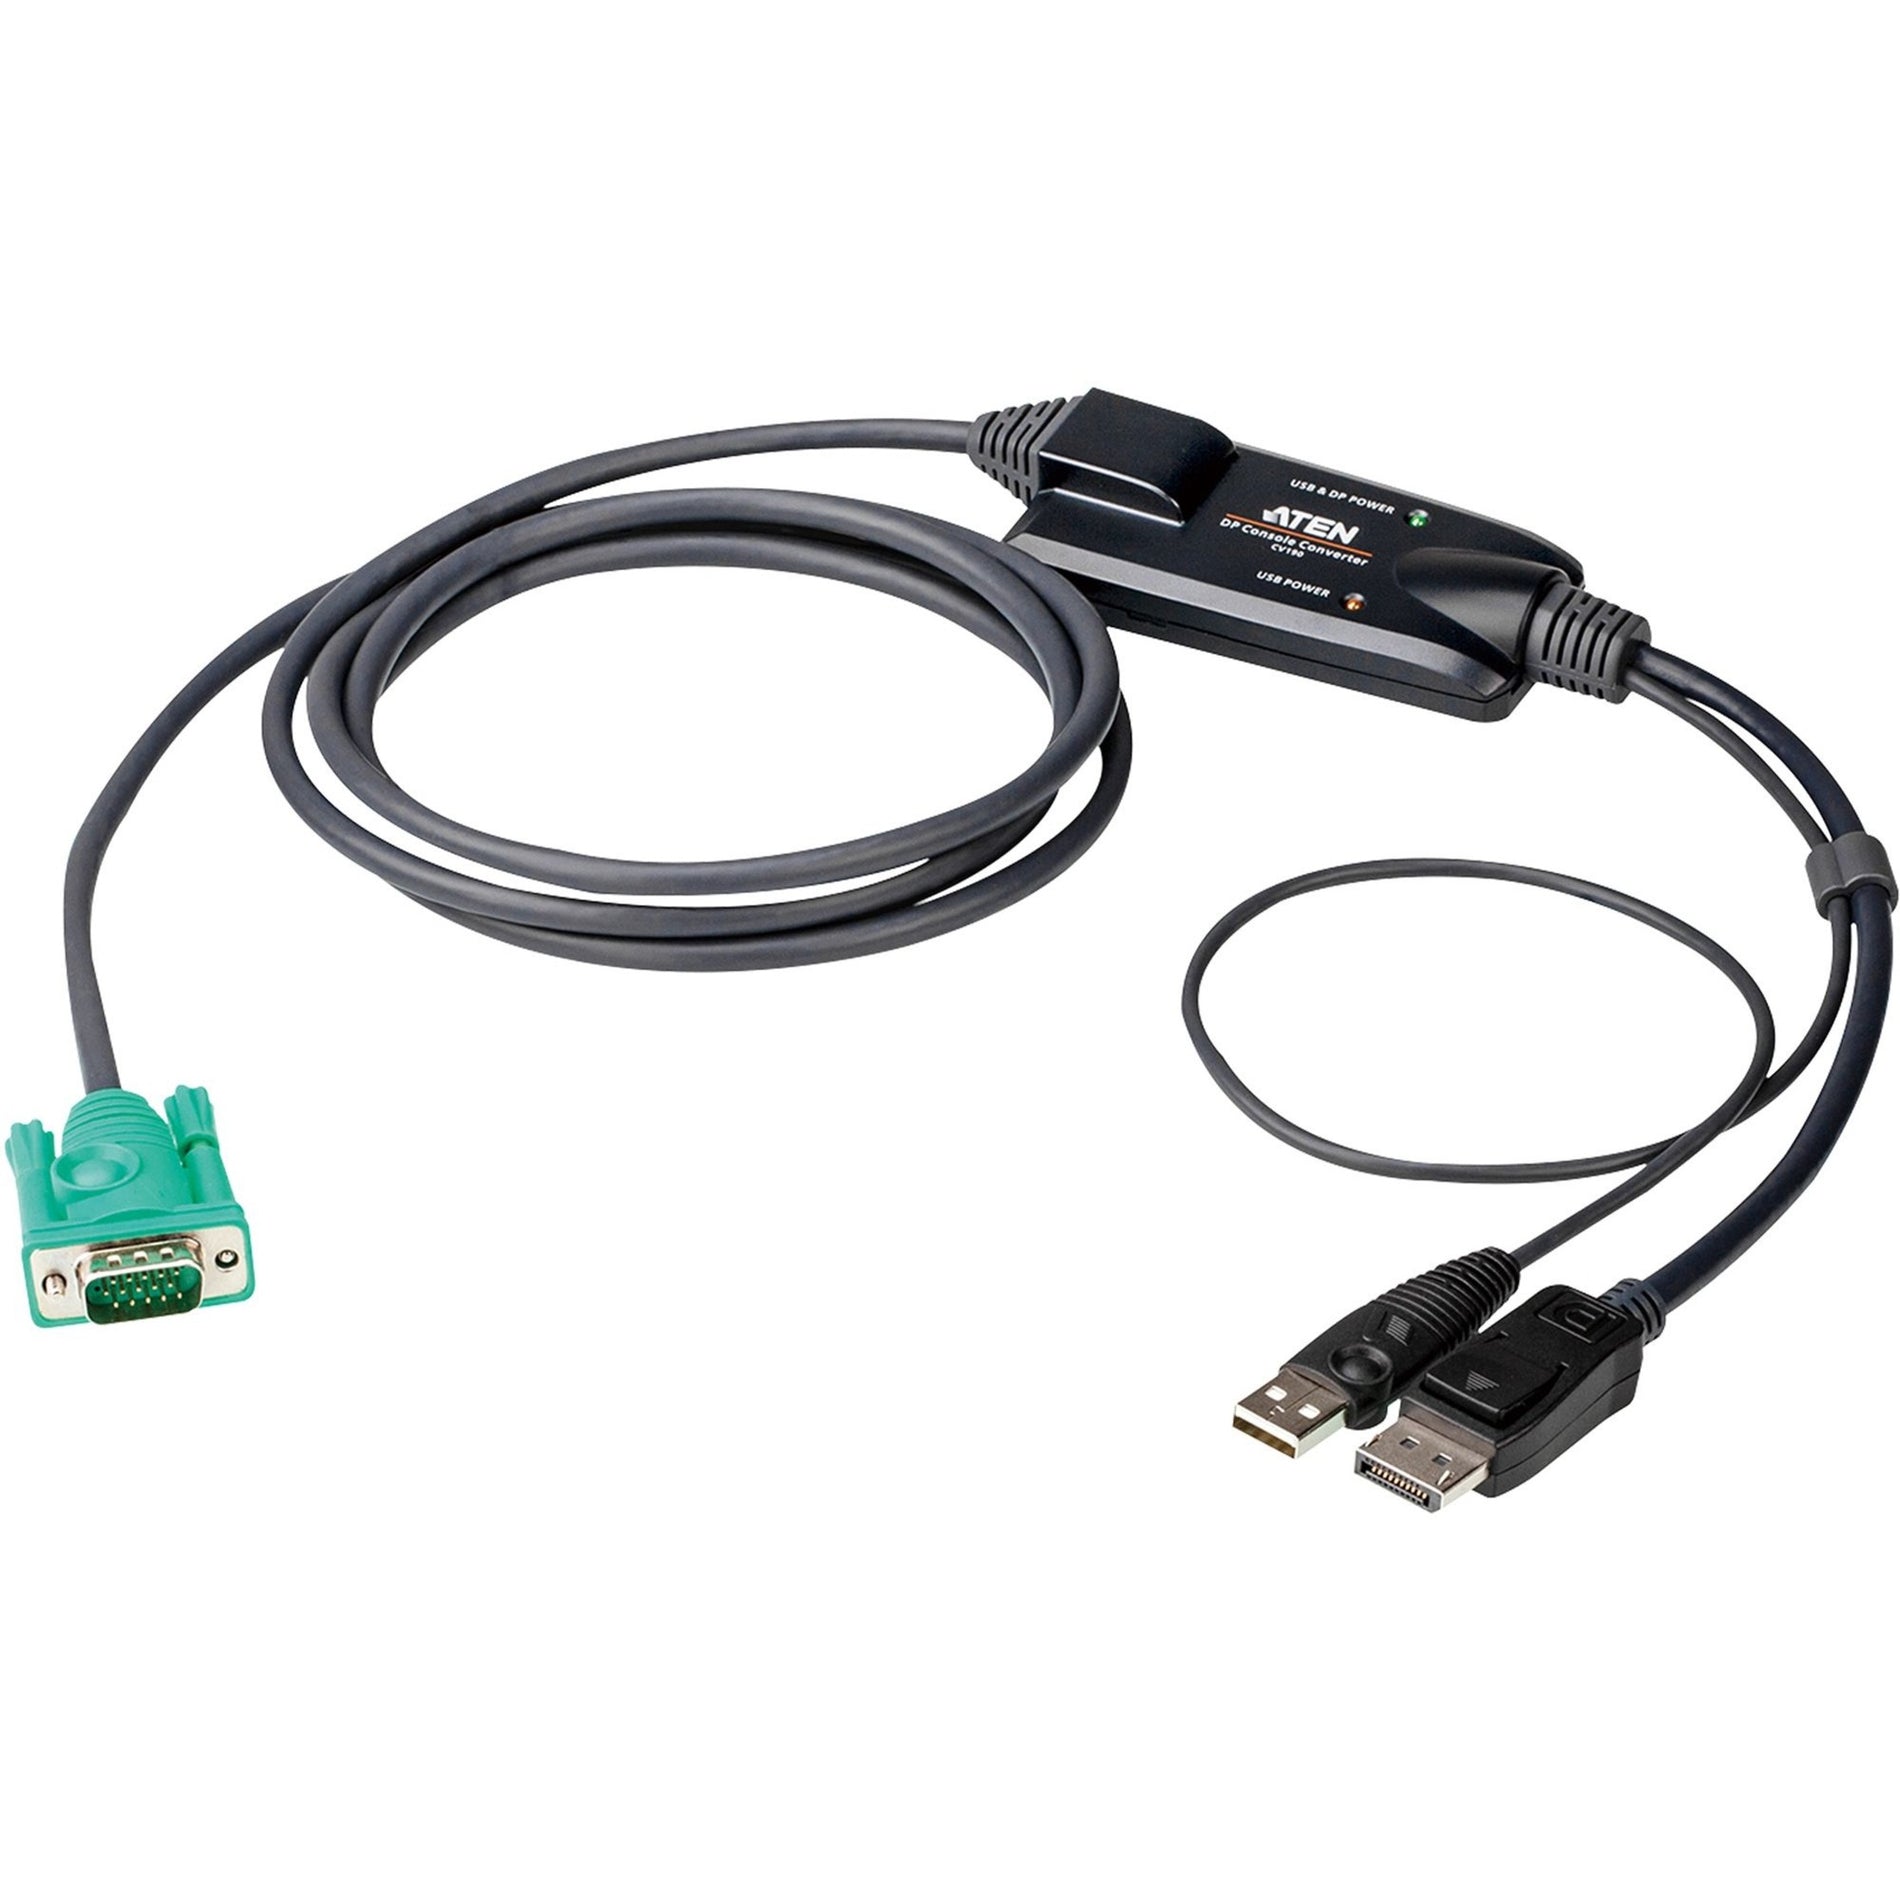 ATEN CV190 DisplayPort Console Converter, LED, 5.91 ft Cable Length